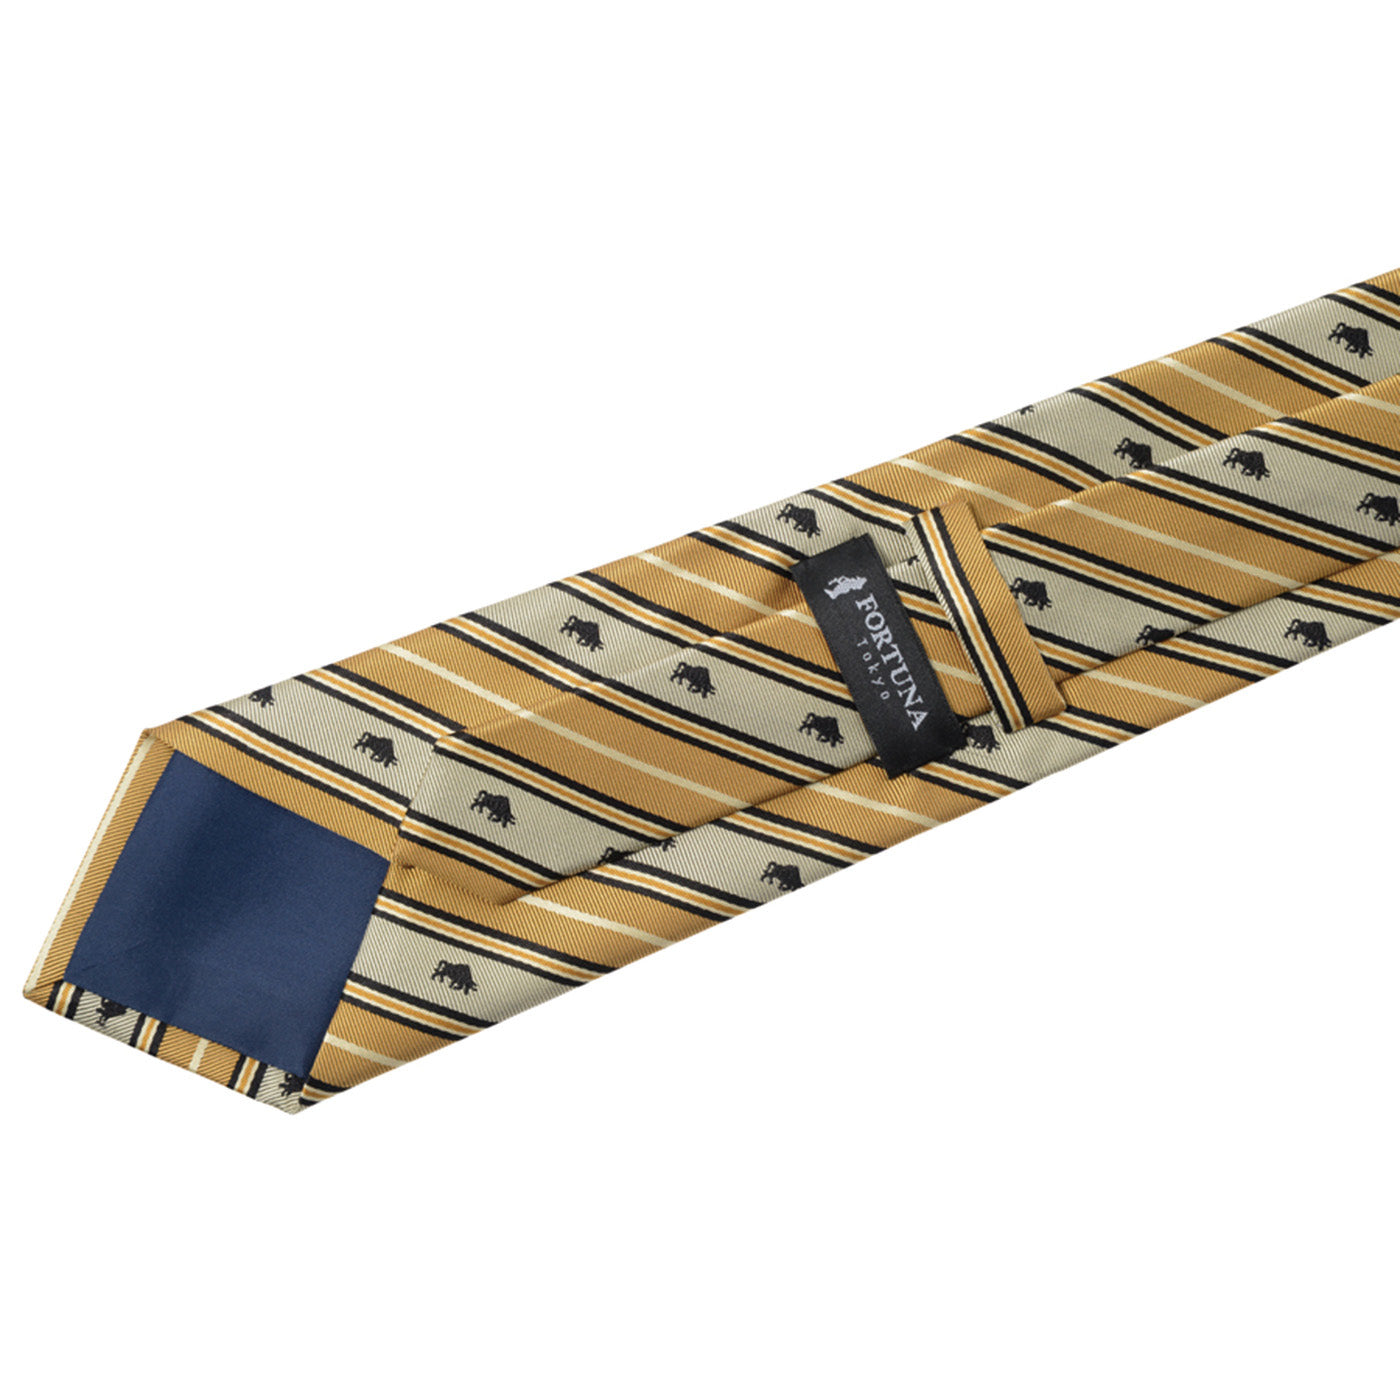 Men’s Jacquard Woven 100% Kyoto Silk Tie -17. Success Charging Bull Striped Pattern Made in Japan FORTUNA Tokyo